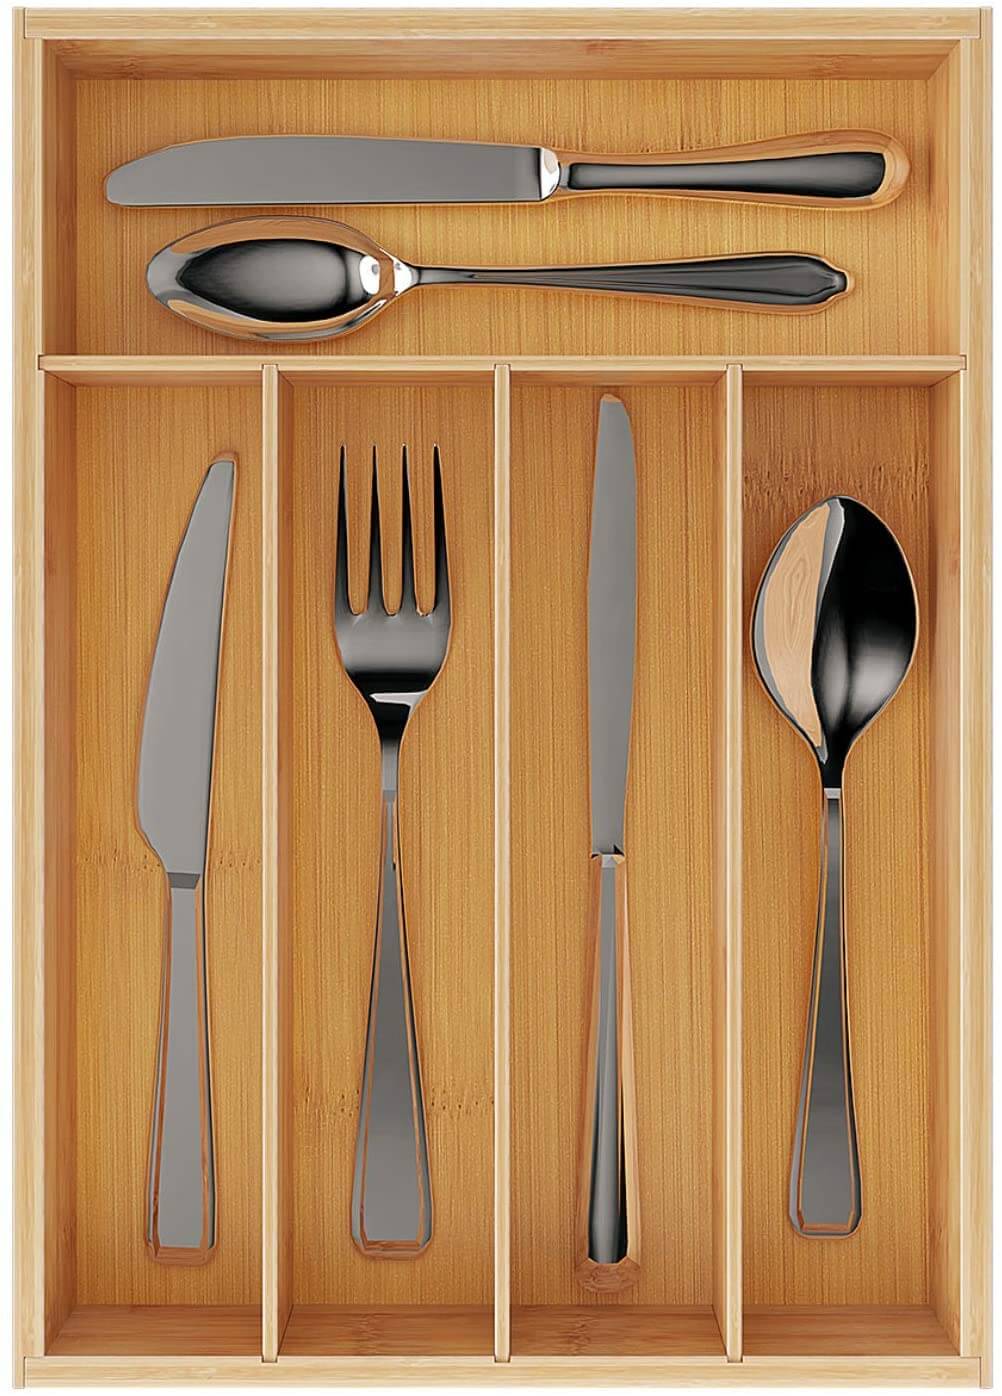 Utensil 5 slot Cutlery and Utility Drawer Organizer-2 Year Warranty Top Rated Bellemain 100/% Pure Bamboo Expandable